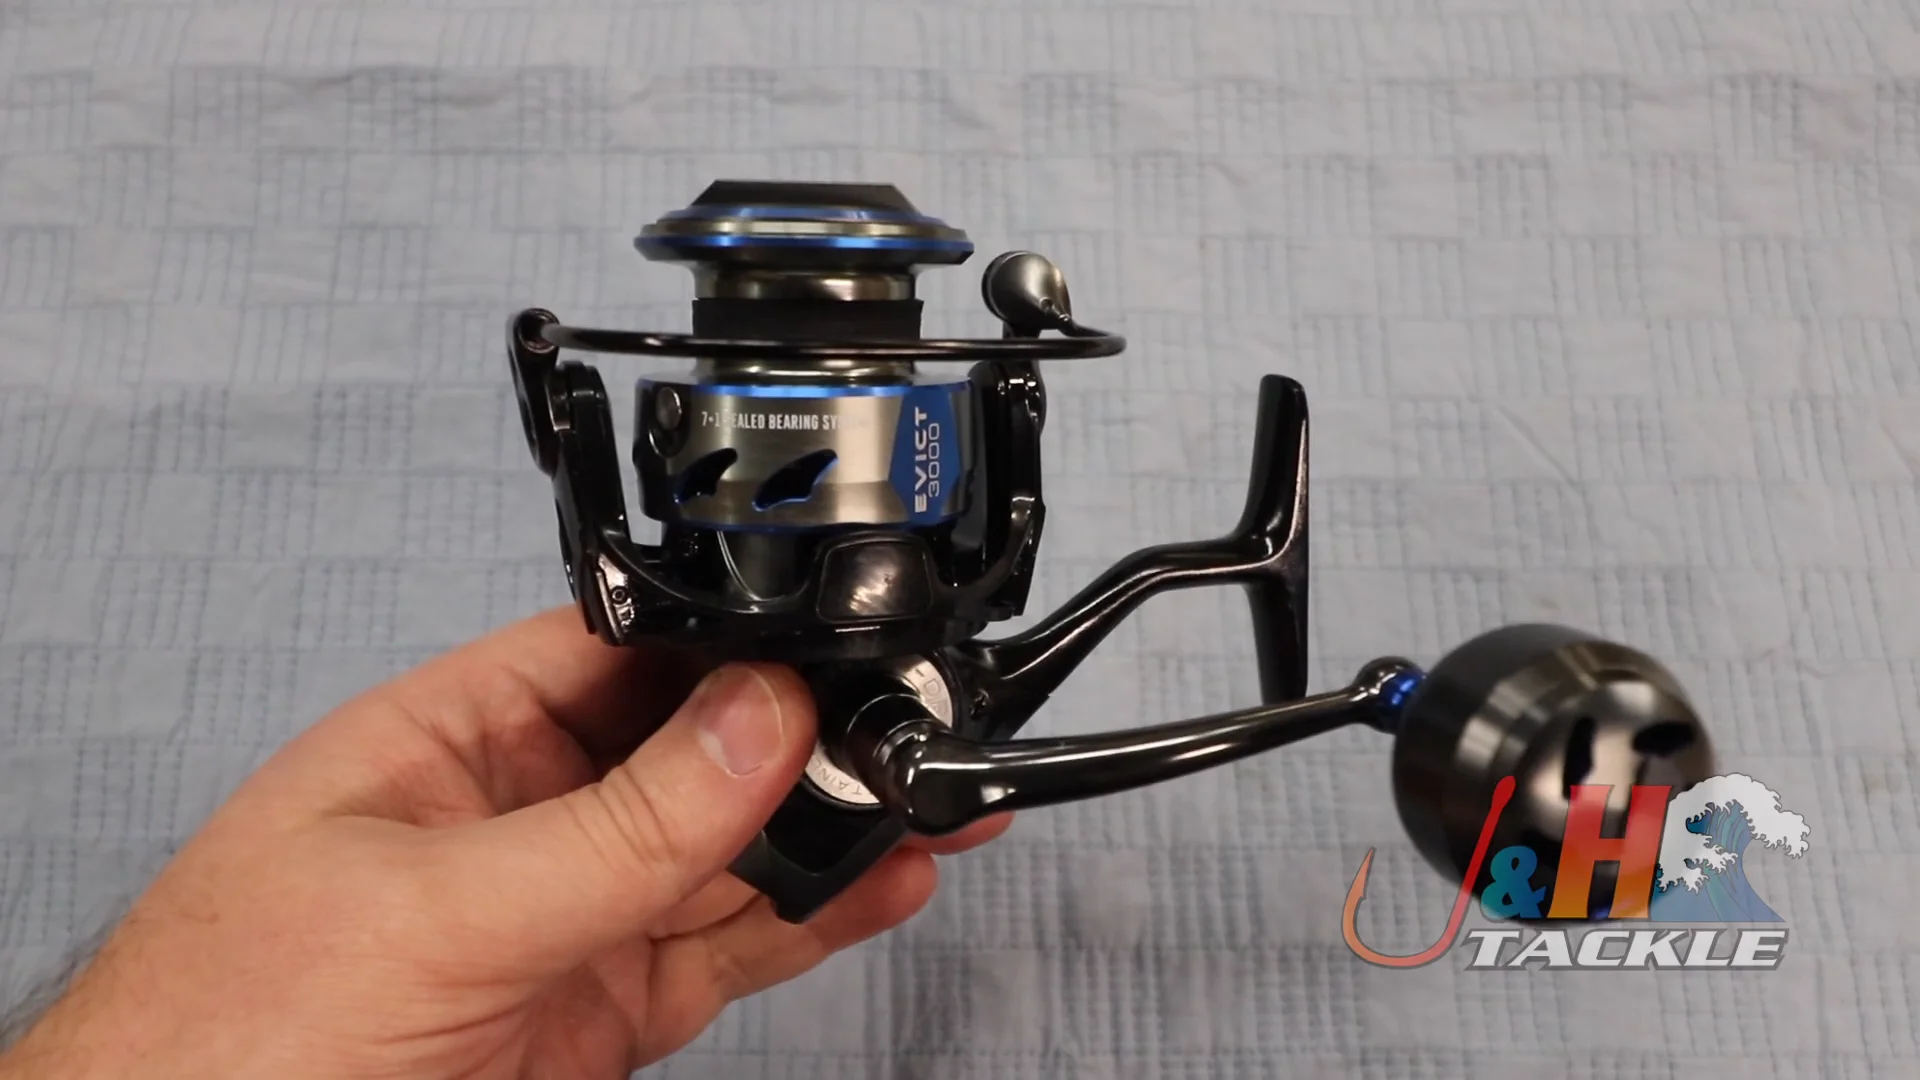 J&H Tackle on X: Anglers love the Tsunami Evict 3000 Spinning